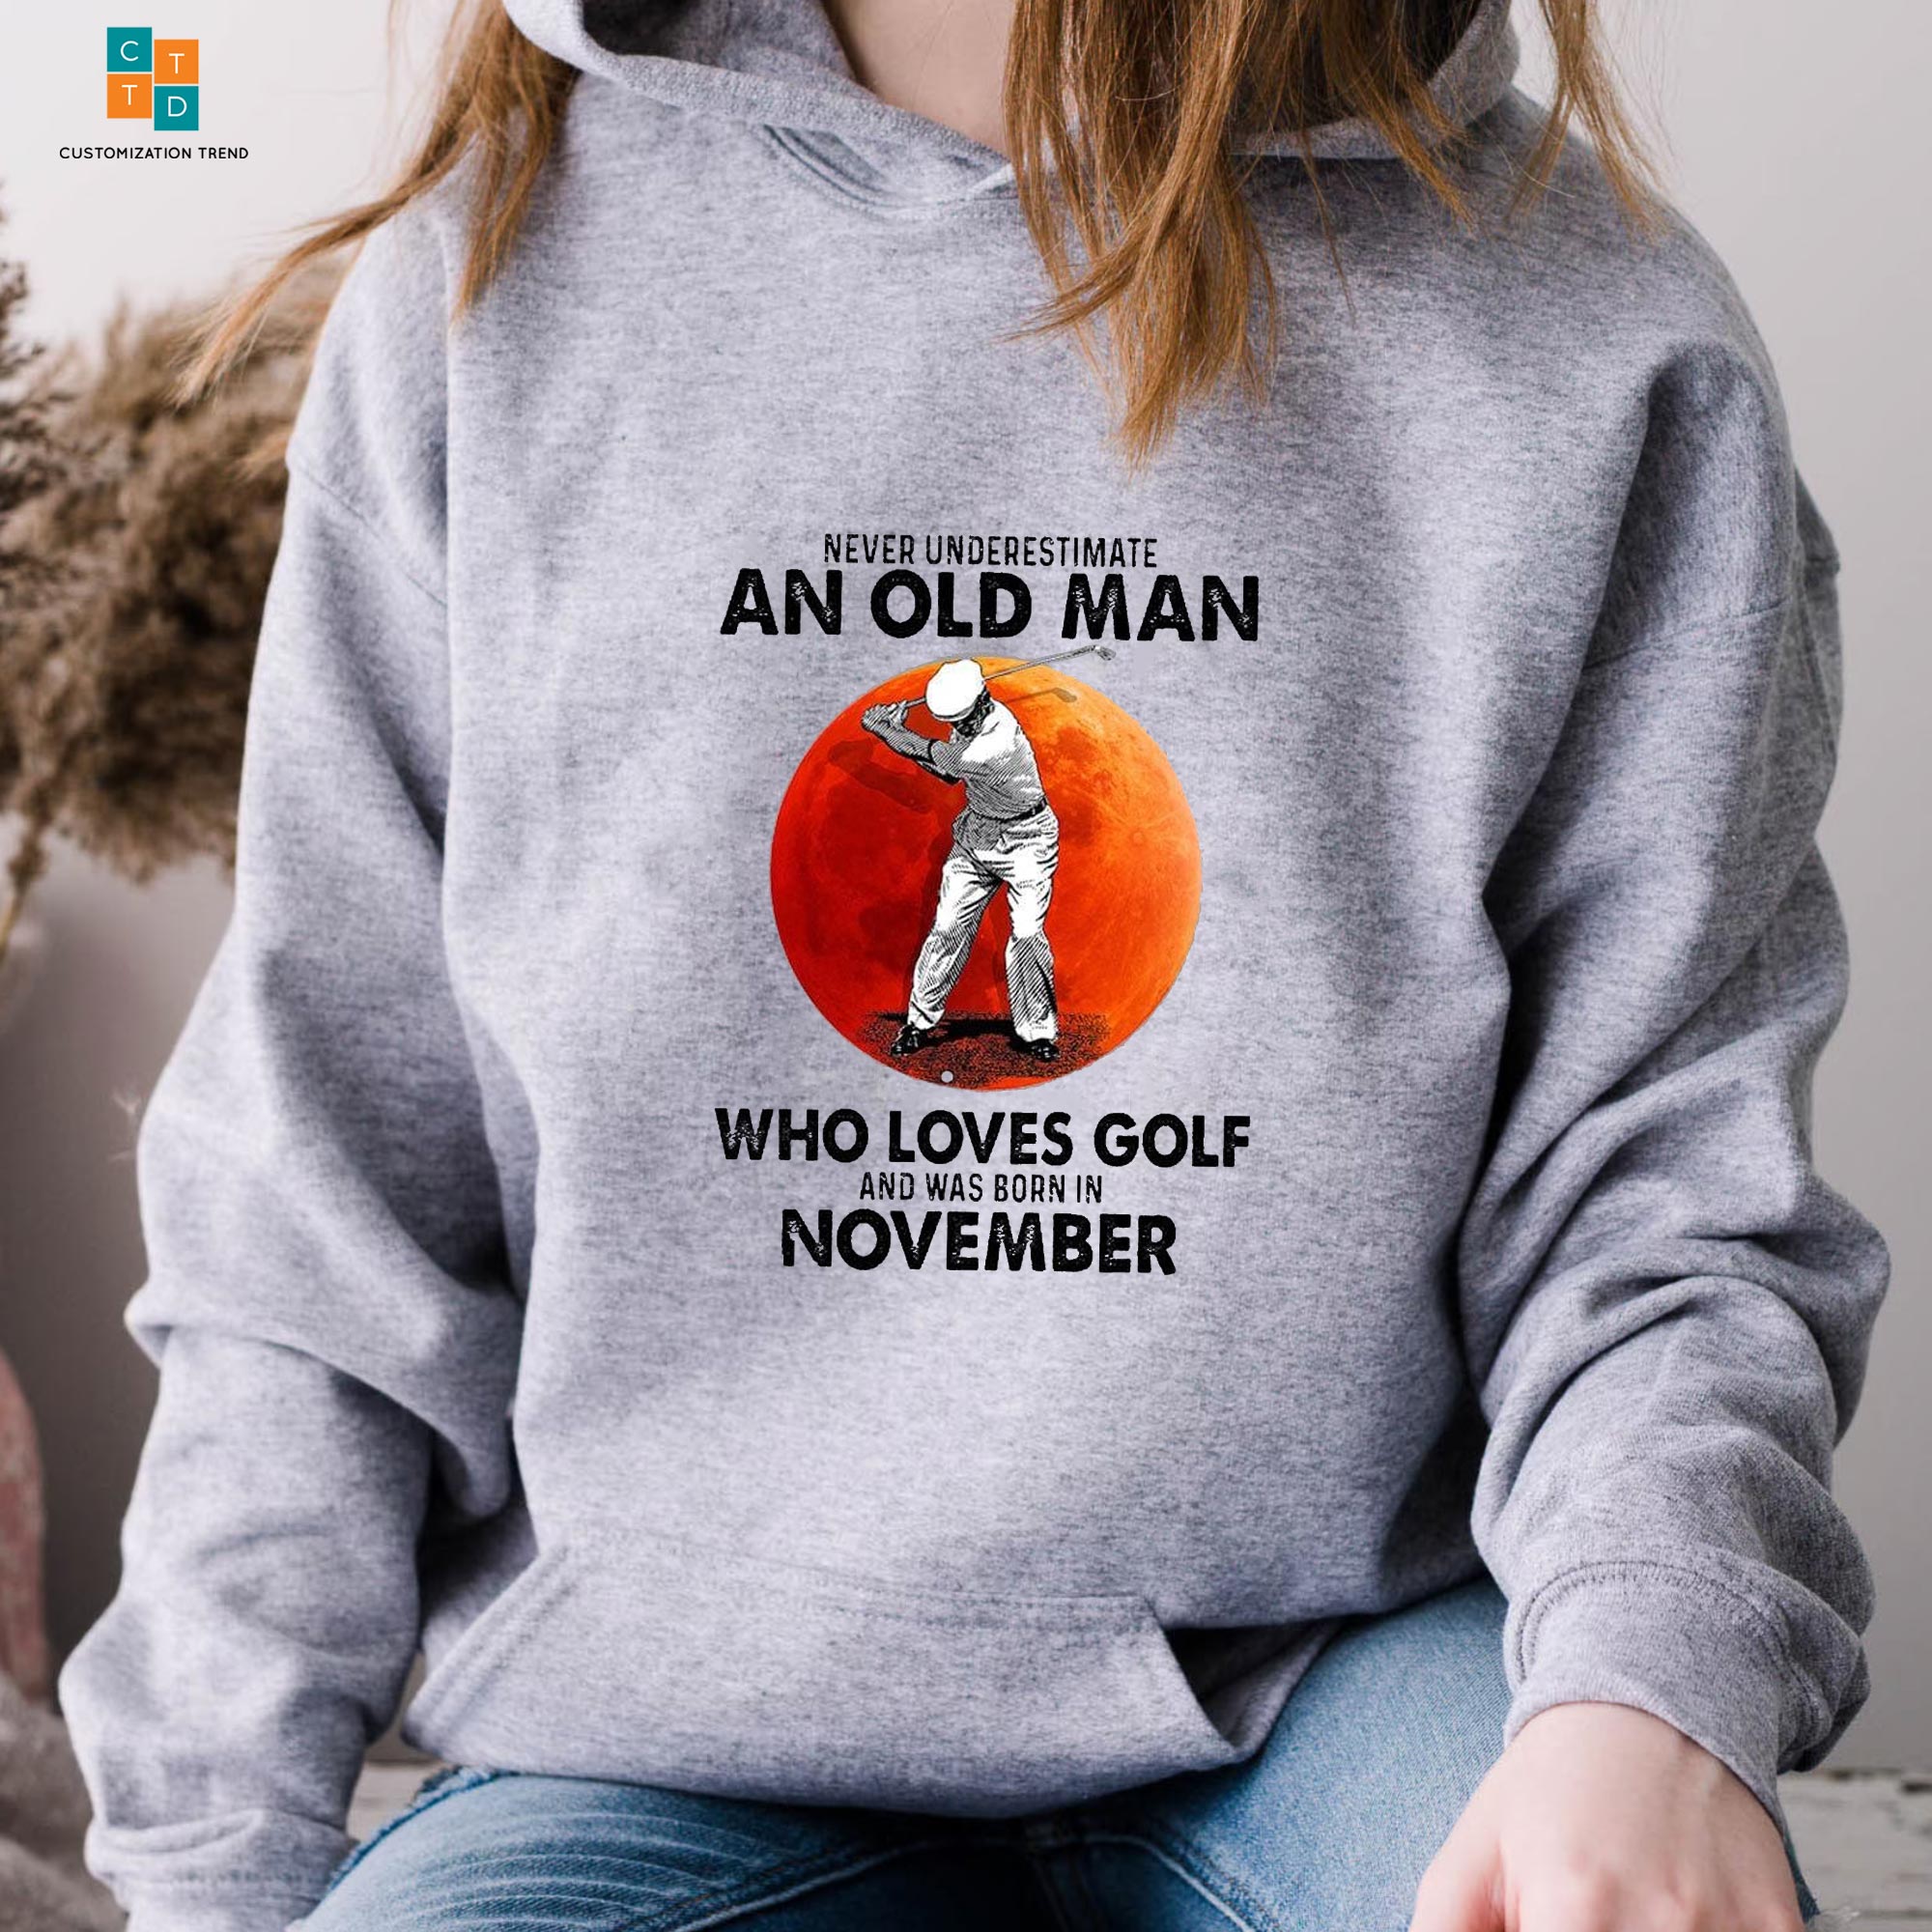 An Old Woman With Native Blood Native Hoodie, Shirt